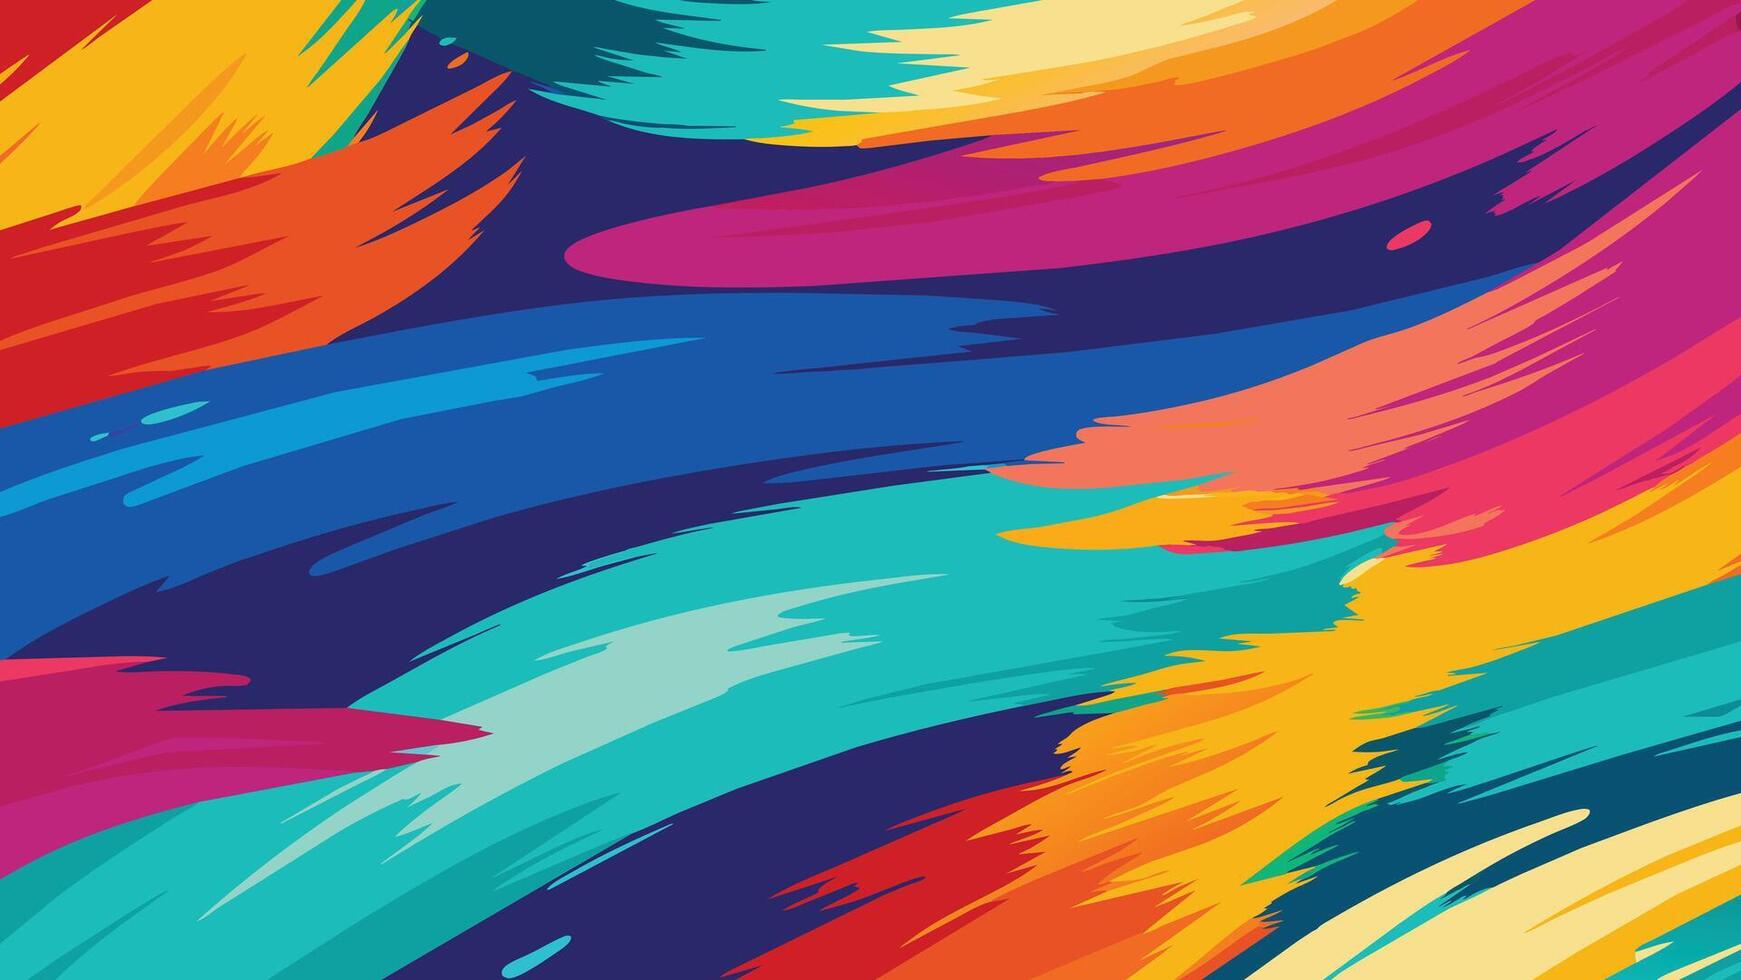 Abstract seamless pattern with brushstrokes in bright colors. Vector illustration.